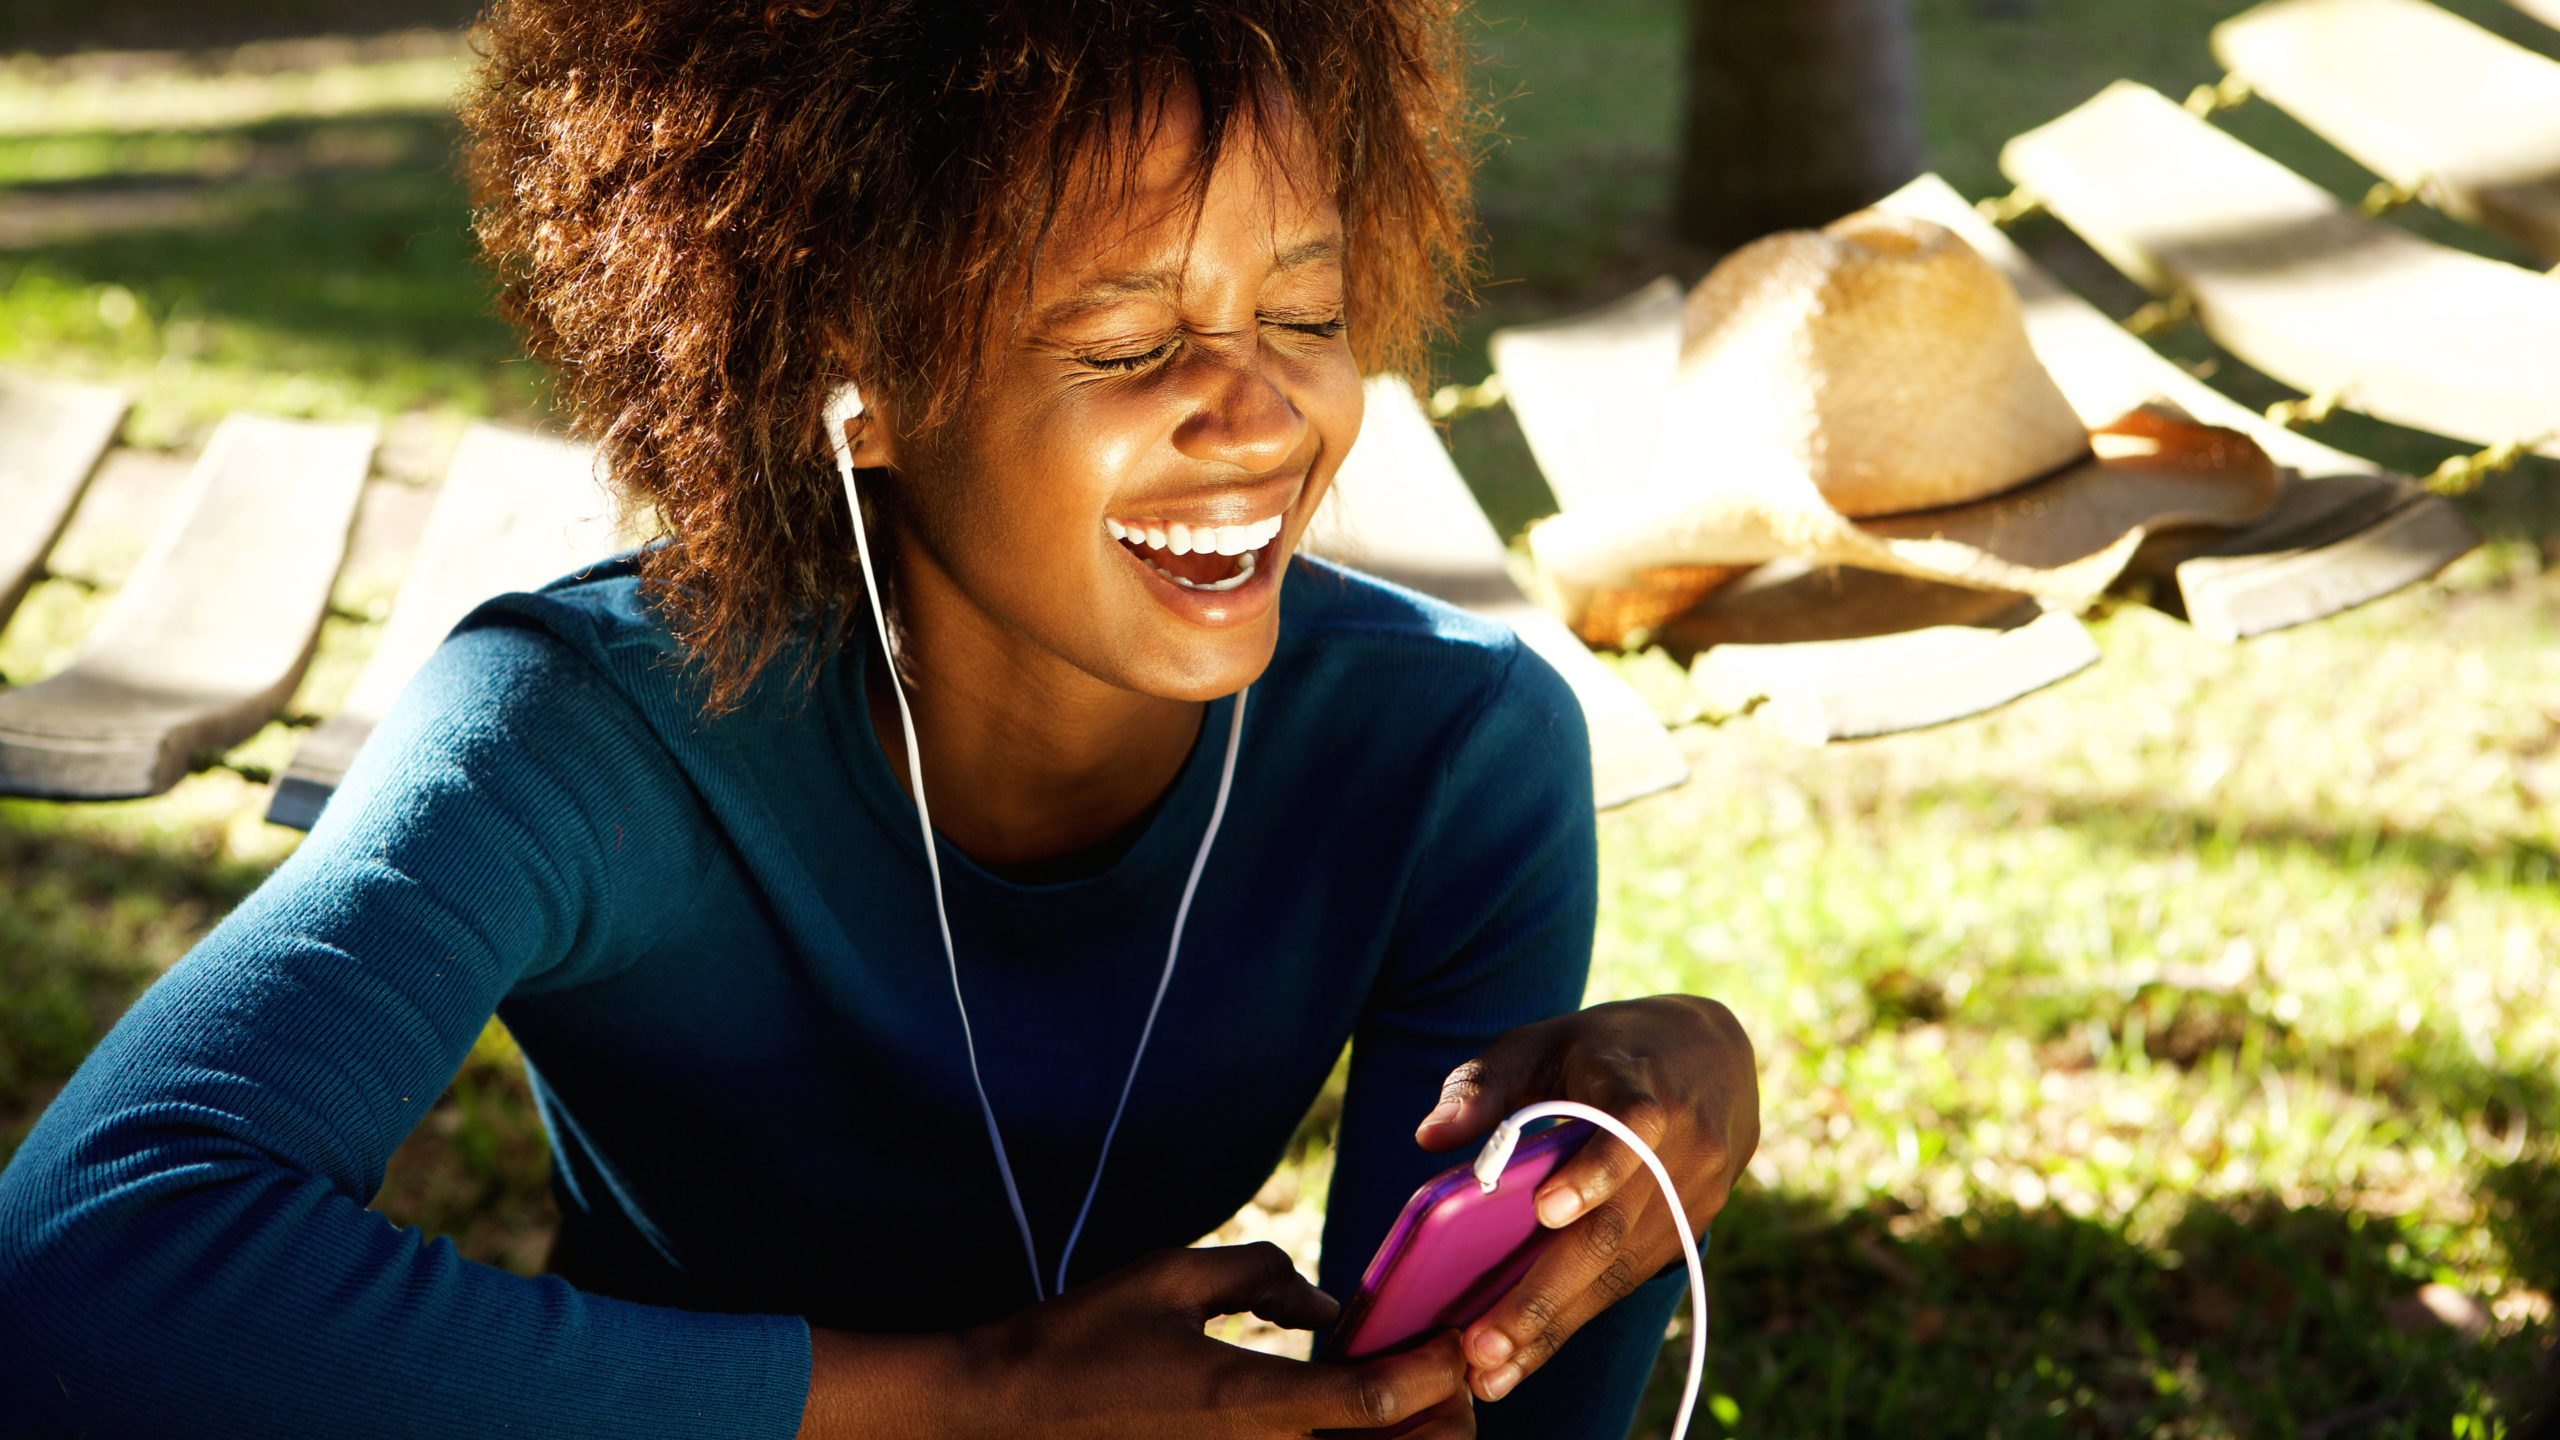 10 Podcasts to Listen to If You Need to Laugh (to Keep From Crying)